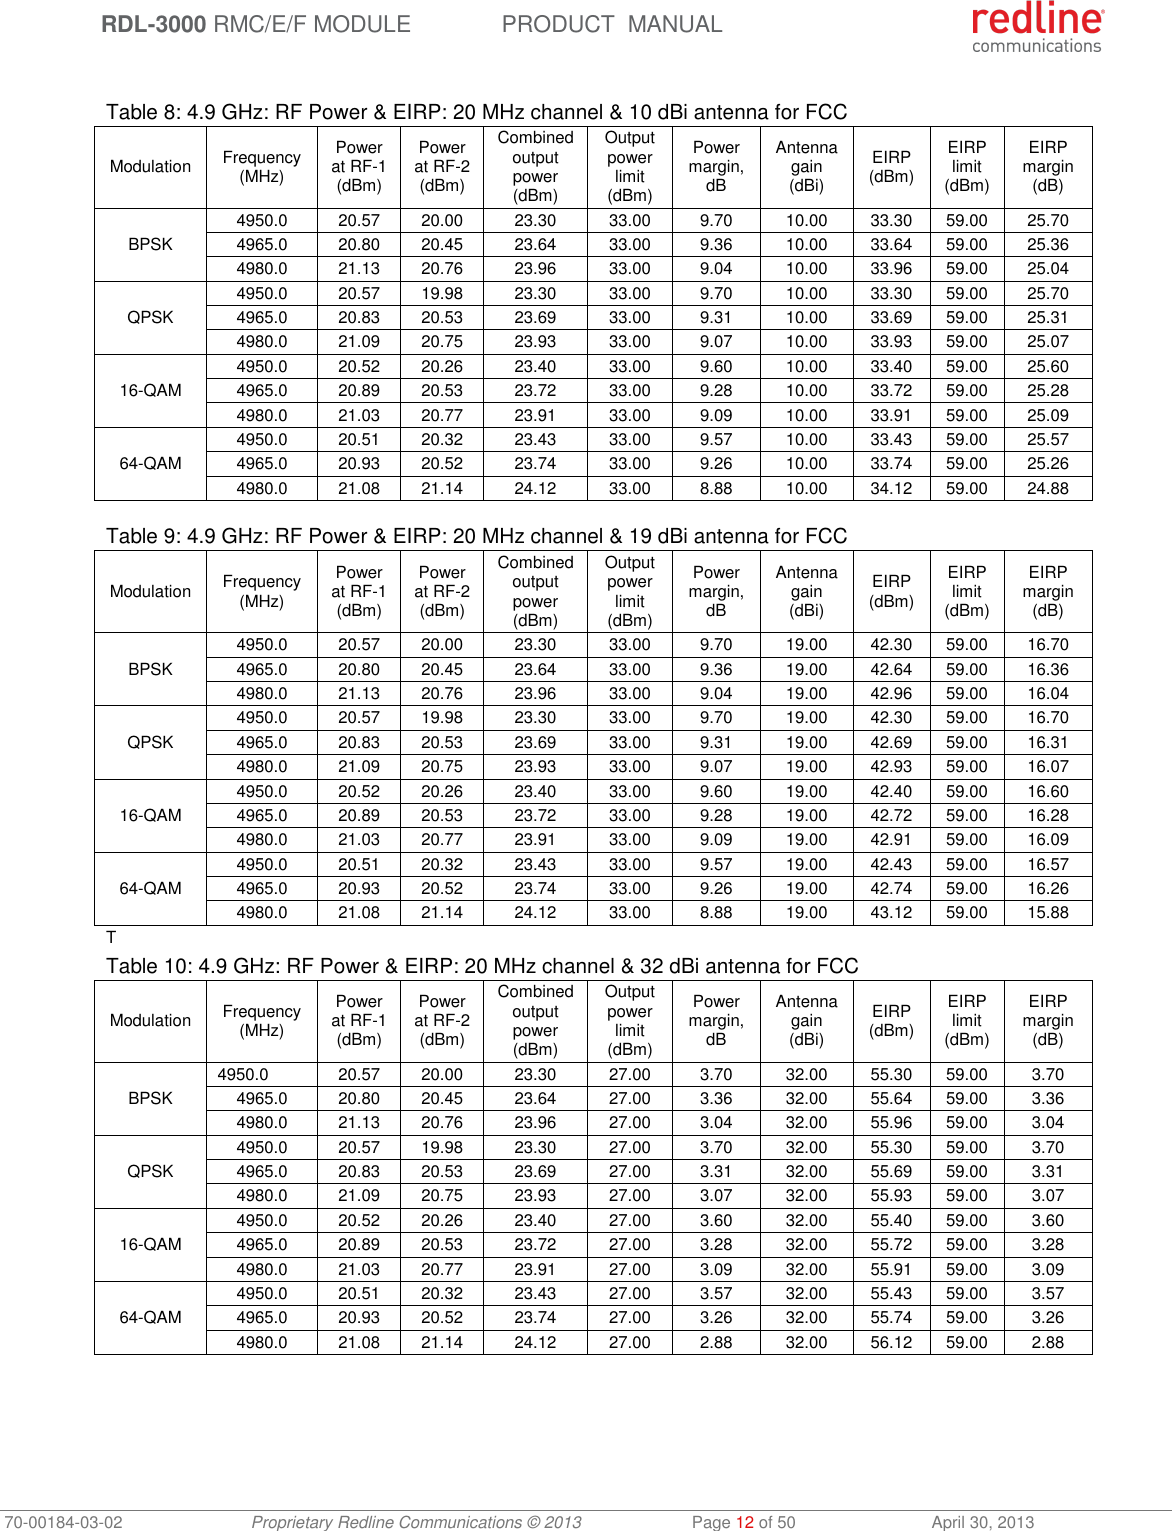  RDL-3000 RMC/E/F MODULE PRODUCT  MANUAL 70-00184-03-02 Proprietary Redline Communications © 2013  Page 12 of 50  April 30, 2013  Table 8: 4.9 GHz: RF Power &amp; EIRP: 20 MHz channel &amp; 10 dBi antenna for FCC Modulation Frequency (MHz) Power at RF-1 (dBm) Power at RF-2 (dBm) Combined output power (dBm) Output power limit (dBm) Power margin, dB Antenna gain (dBi) EIRP (dBm) EIRP limit (dBm) EIRP margin (dB) BPSK 4950.0 20.57 20.00 23.30 33.00 9.70 10.00 33.30 59.00 25.70 4965.0 20.80 20.45 23.64 33.00 9.36 10.00 33.64 59.00 25.36 4980.0 21.13 20.76 23.96 33.00 9.04 10.00 33.96 59.00 25.04 QPSK 4950.0 20.57 19.98 23.30 33.00 9.70 10.00 33.30 59.00 25.70 4965.0 20.83 20.53 23.69 33.00 9.31 10.00 33.69 59.00 25.31 4980.0 21.09 20.75 23.93 33.00 9.07 10.00 33.93 59.00 25.07 16-QAM 4950.0 20.52 20.26 23.40 33.00 9.60 10.00 33.40 59.00 25.60 4965.0 20.89 20.53 23.72 33.00 9.28 10.00 33.72 59.00 25.28 4980.0 21.03 20.77 23.91 33.00 9.09 10.00 33.91 59.00 25.09 64-QAM 4950.0 20.51 20.32 23.43 33.00 9.57 10.00 33.43 59.00 25.57 4965.0 20.93 20.52 23.74 33.00 9.26 10.00 33.74 59.00 25.26 4980.0 21.08 21.14 24.12 33.00 8.88 10.00 34.12 59.00 24.88  Table 9: 4.9 GHz: RF Power &amp; EIRP: 20 MHz channel &amp; 19 dBi antenna for FCC Modulation Frequency (MHz) Power at RF-1 (dBm) Power at RF-2 (dBm) Combined output power (dBm) Output power limit (dBm) Power margin, dB Antenna gain (dBi) EIRP (dBm) EIRP limit (dBm) EIRP margin (dB) BPSK 4950.0 20.57 20.00 23.30 33.00 9.70 19.00 42.30 59.00 16.70 4965.0 20.80 20.45 23.64 33.00 9.36 19.00 42.64 59.00 16.36 4980.0 21.13 20.76 23.96 33.00 9.04 19.00 42.96 59.00 16.04 QPSK 4950.0 20.57 19.98 23.30 33.00 9.70 19.00 42.30 59.00 16.70 4965.0 20.83 20.53 23.69 33.00 9.31 19.00 42.69 59.00 16.31 4980.0 21.09 20.75 23.93 33.00 9.07 19.00 42.93 59.00 16.07 16-QAM 4950.0 20.52 20.26 23.40 33.00 9.60 19.00 42.40 59.00 16.60 4965.0 20.89 20.53 23.72 33.00 9.28 19.00 42.72 59.00 16.28 4980.0 21.03 20.77 23.91 33.00 9.09 19.00 42.91 59.00 16.09 64-QAM 4950.0 20.51 20.32 23.43 33.00 9.57 19.00 42.43 59.00 16.57 4965.0 20.93 20.52 23.74 33.00 9.26 19.00 42.74 59.00 16.26 4980.0 21.08 21.14 24.12 33.00 8.88 19.00 43.12 59.00 15.88 T  Table 10: 4.9 GHz: RF Power &amp; EIRP: 20 MHz channel &amp; 32 dBi antenna for FCC Modulation Frequency (MHz) Power at RF-1 (dBm) Power at RF-2 (dBm) Combined output power (dBm) Output power limit (dBm) Power margin, dB Antenna gain (dBi) EIRP (dBm) EIRP limit (dBm) EIRP margin (dB) BPSK 4950.0 20.57 20.00 23.30 27.00 3.70 32.00 55.30 59.00 3.70 4965.0 20.80 20.45 23.64 27.00 3.36 32.00 55.64 59.00 3.36 4980.0 21.13 20.76 23.96 27.00 3.04 32.00 55.96 59.00 3.04 QPSK 4950.0 20.57 19.98 23.30 27.00 3.70 32.00 55.30 59.00 3.70 4965.0 20.83 20.53 23.69 27.00 3.31 32.00 55.69 59.00 3.31 4980.0 21.09 20.75 23.93 27.00 3.07 32.00 55.93 59.00 3.07 16-QAM 4950.0 20.52 20.26 23.40 27.00 3.60 32.00 55.40 59.00 3.60 4965.0 20.89 20.53 23.72 27.00 3.28 32.00 55.72 59.00 3.28 4980.0 21.03 20.77 23.91 27.00 3.09 32.00 55.91 59.00 3.09 64-QAM 4950.0 20.51 20.32 23.43 27.00 3.57 32.00 55.43 59.00 3.57 4965.0 20.93 20.52 23.74 27.00 3.26 32.00 55.74 59.00 3.26 4980.0 21.08 21.14 24.12 27.00 2.88 32.00 56.12 59.00 2.88  